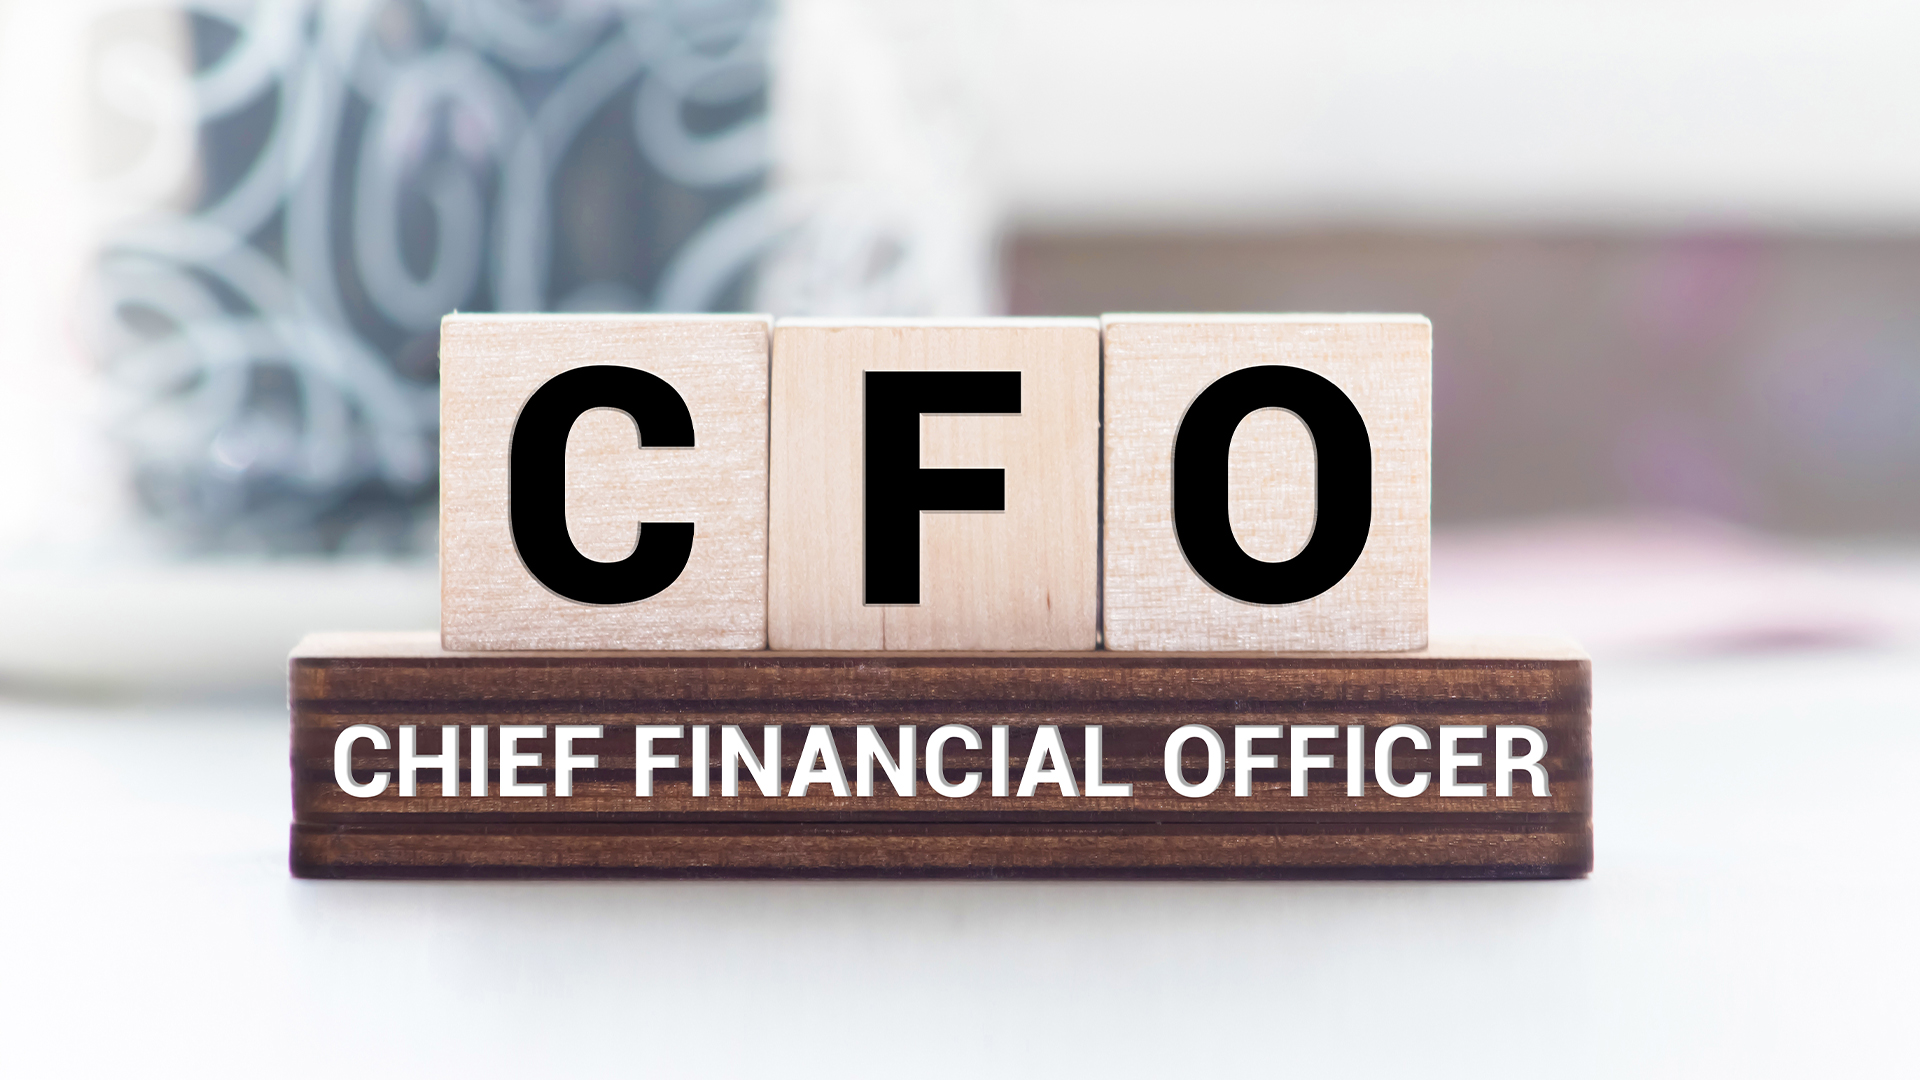 CFO Chief Financial Officer written on a wooden cube in front of a laptop